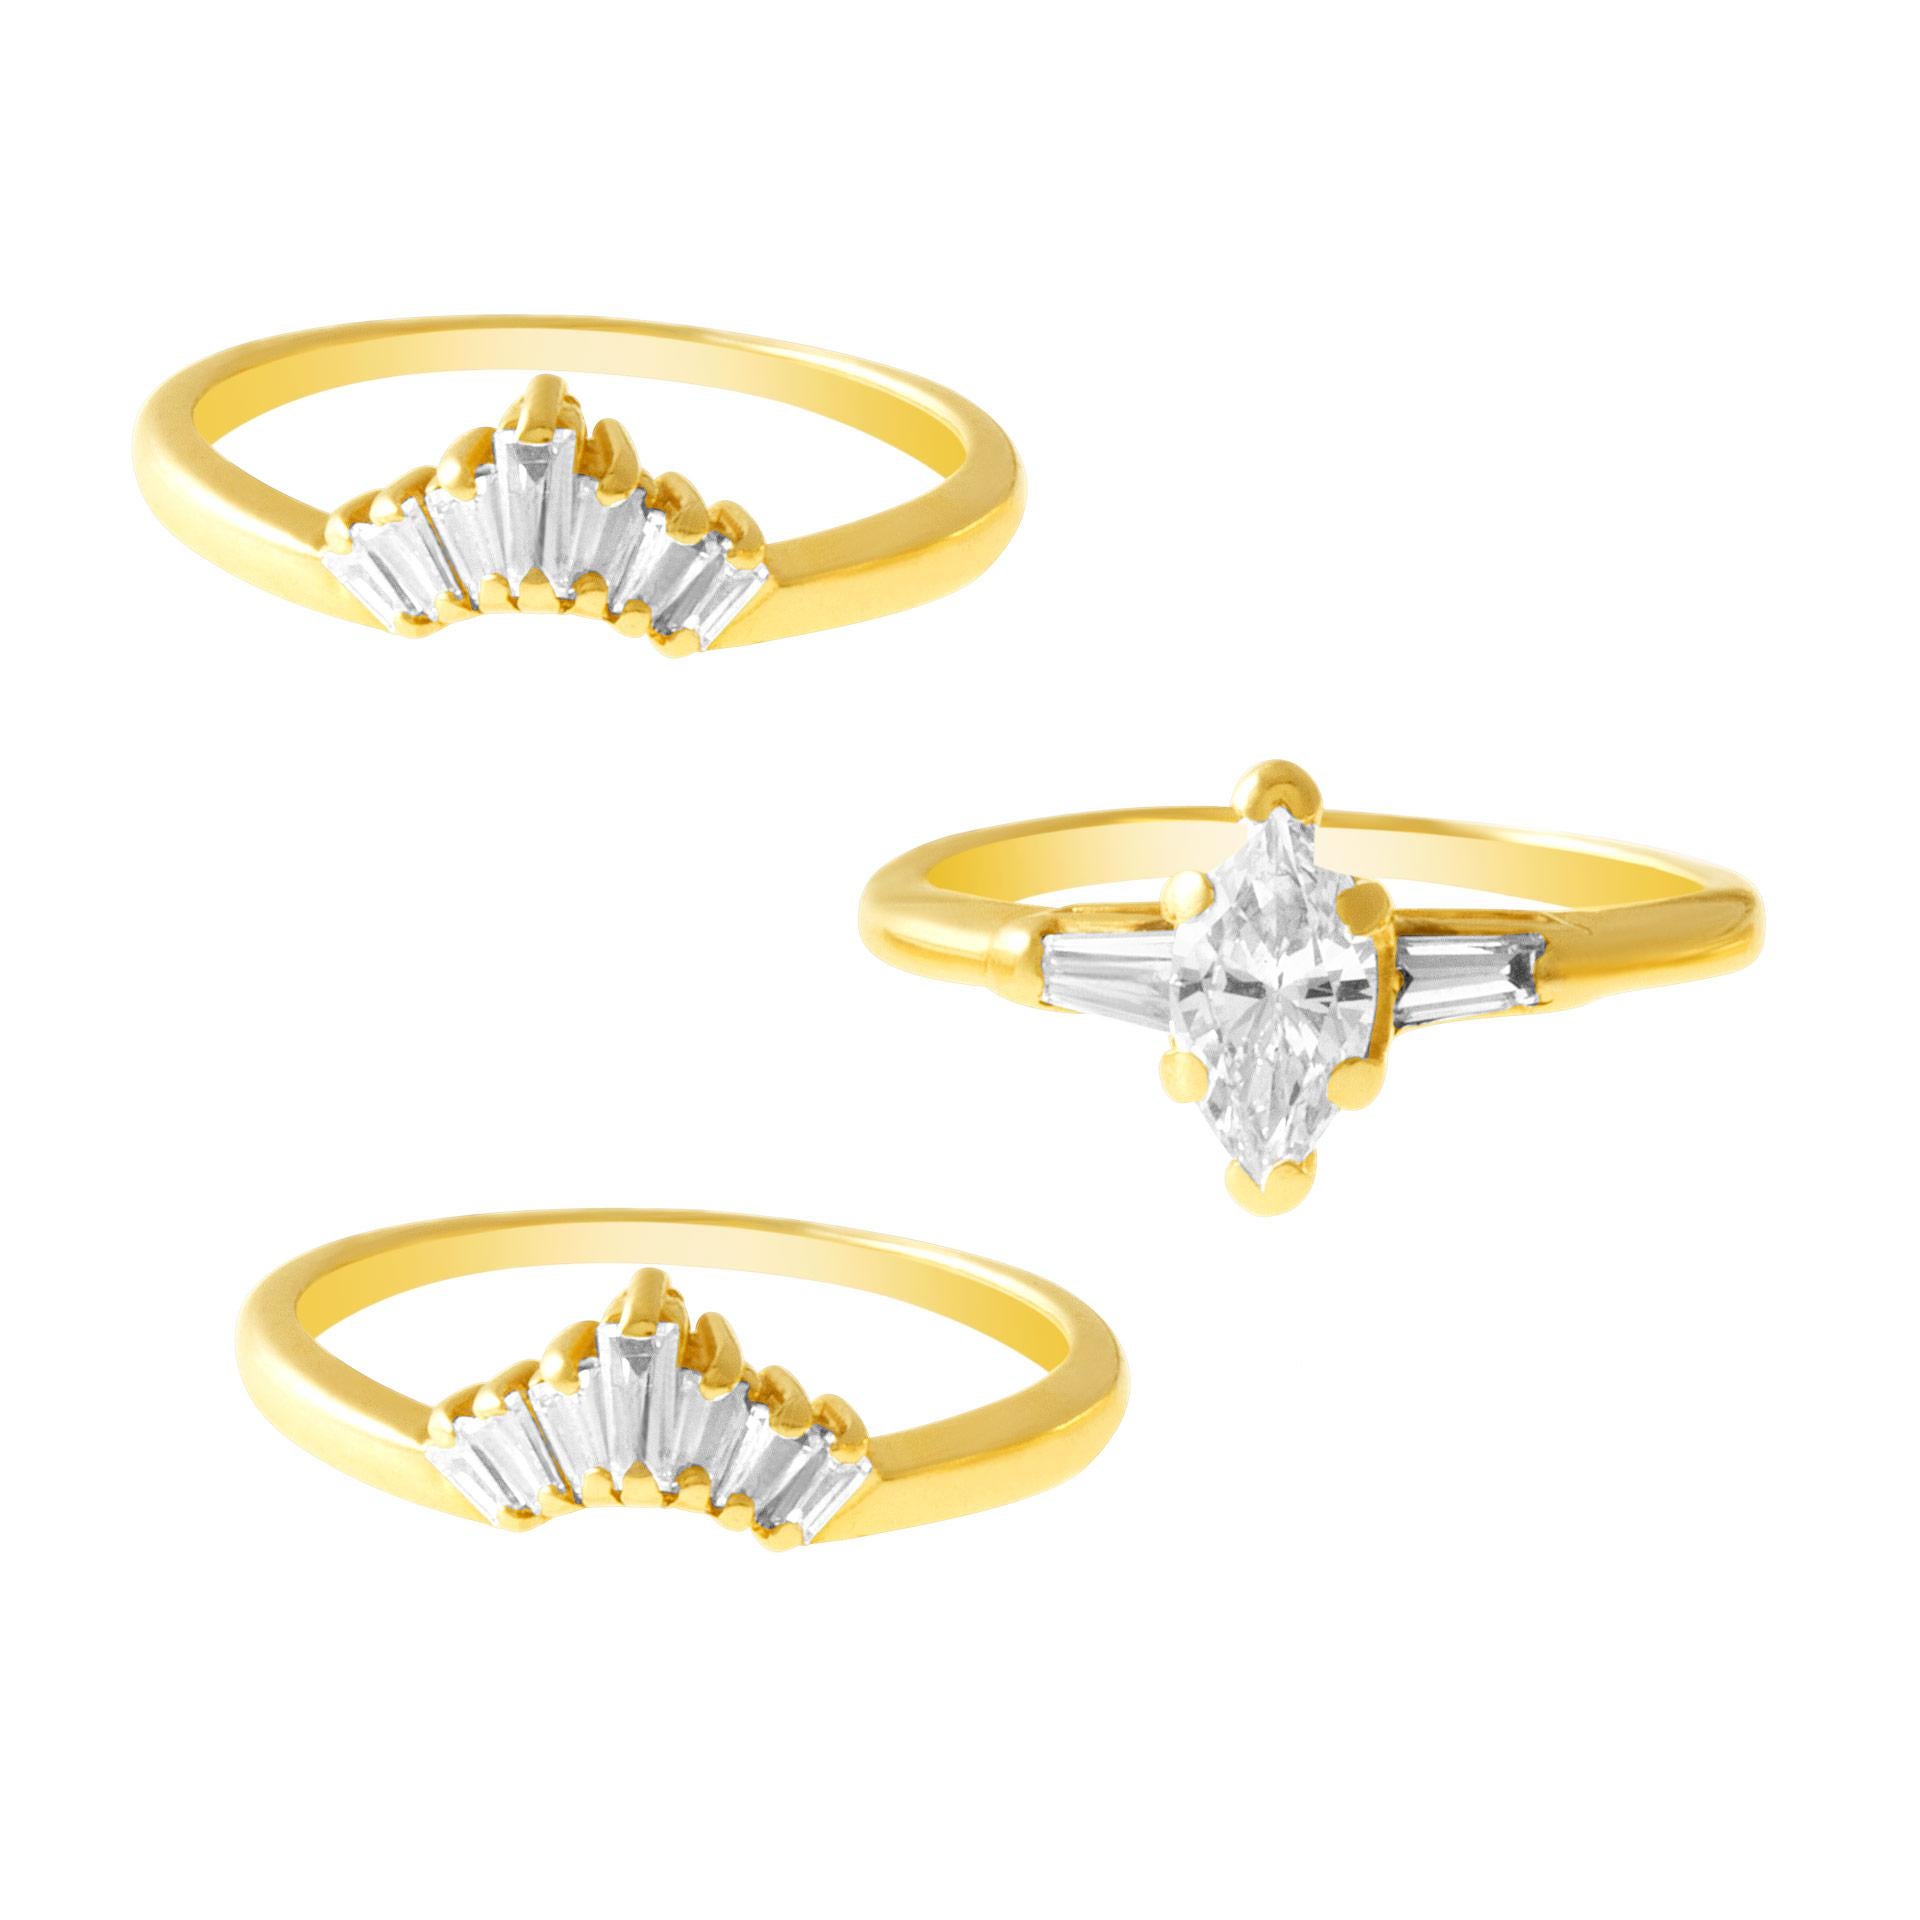 Marquise and baguette diamond engagement ring with jacket in 14k yellow gold. Approx. 0.90 cts in marquise and baguette diamonds. Size 6.5.

This Diamond ring is currently size 6.5 and some items can be sized up or down, please ask! It weighs 4